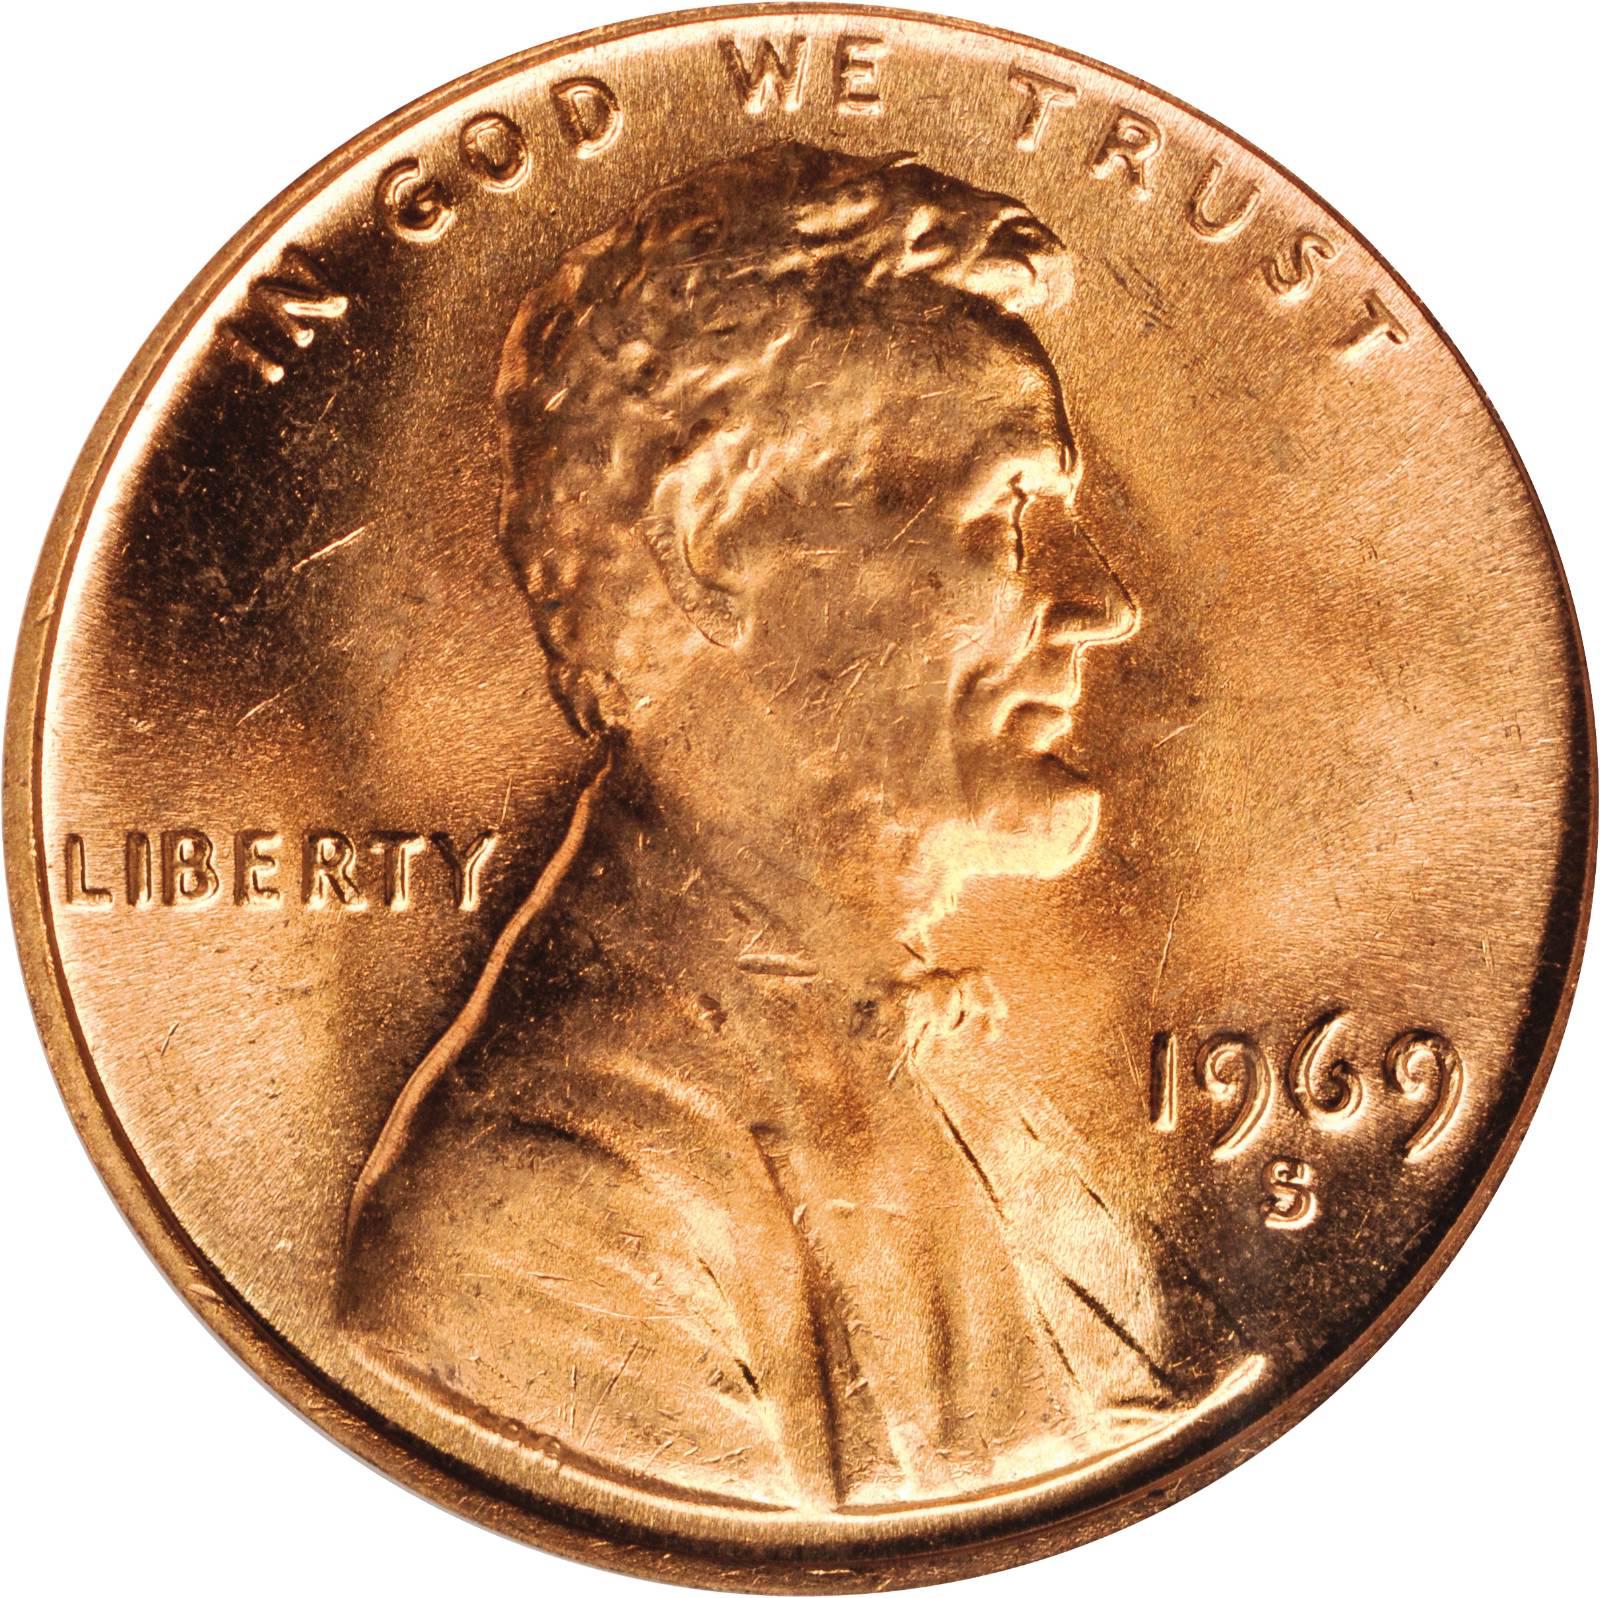 Value Of 1969 S Lincoln Cents We Appraise Modern Coins,Vegetarian Chinese Food Recipes With Pictures